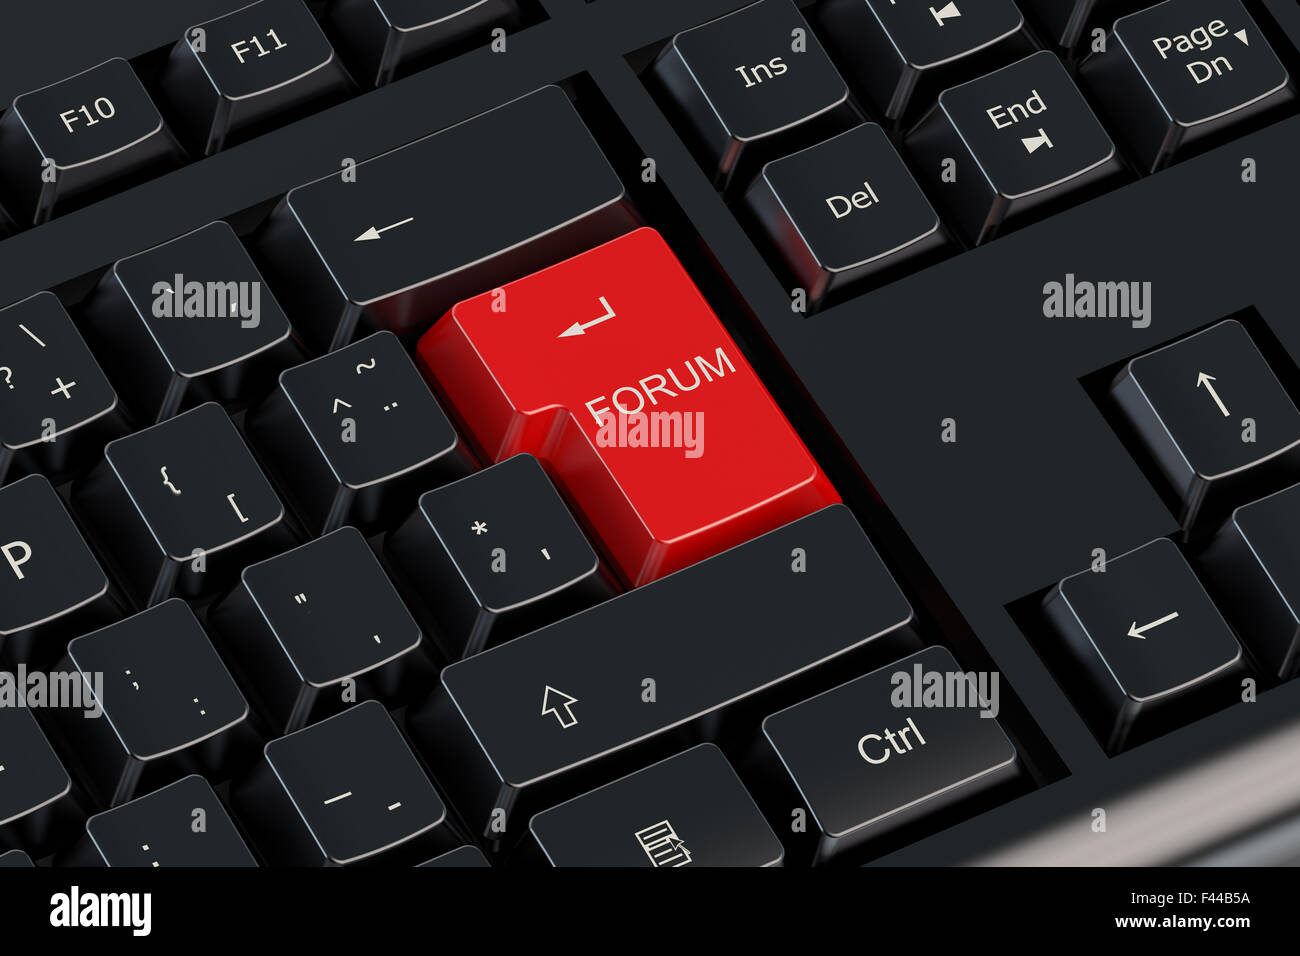 Forum red keyboard button Stock Photo